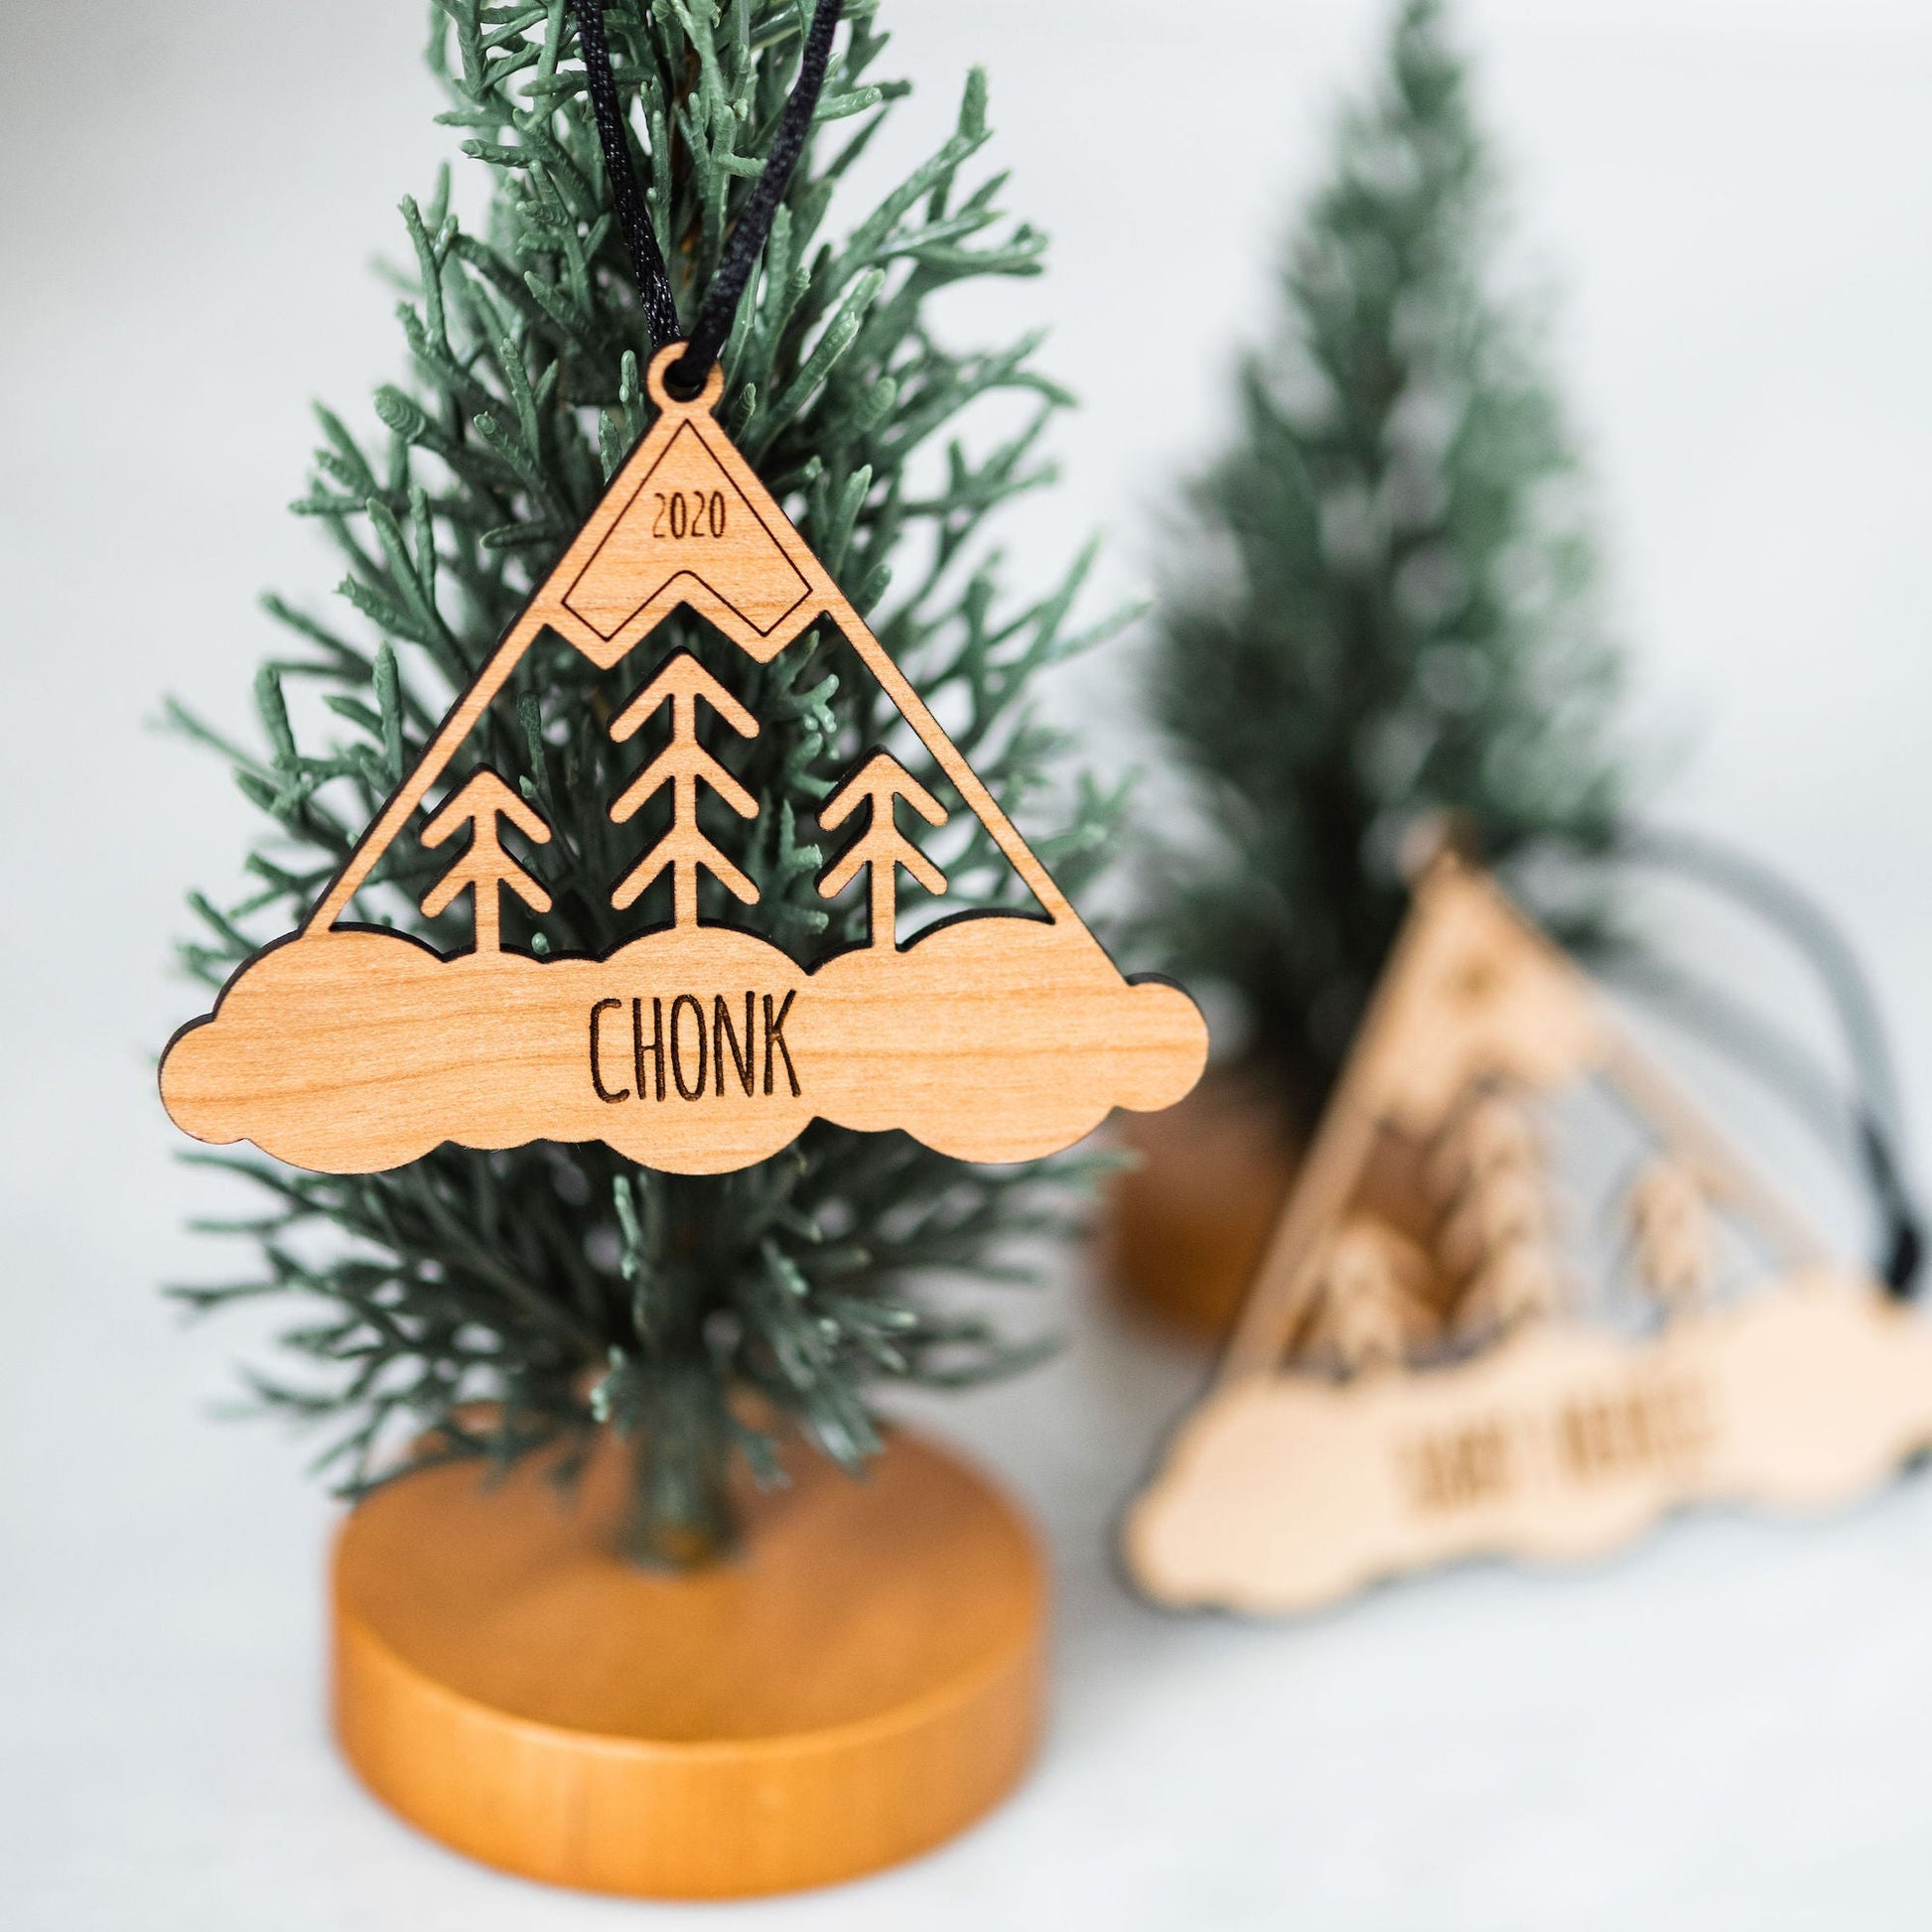 Custom Wood Ornaments: Mountain - Laser Cut and Laser Engraved Cherry Wood by LeeMo Designs in Bend, Oregon